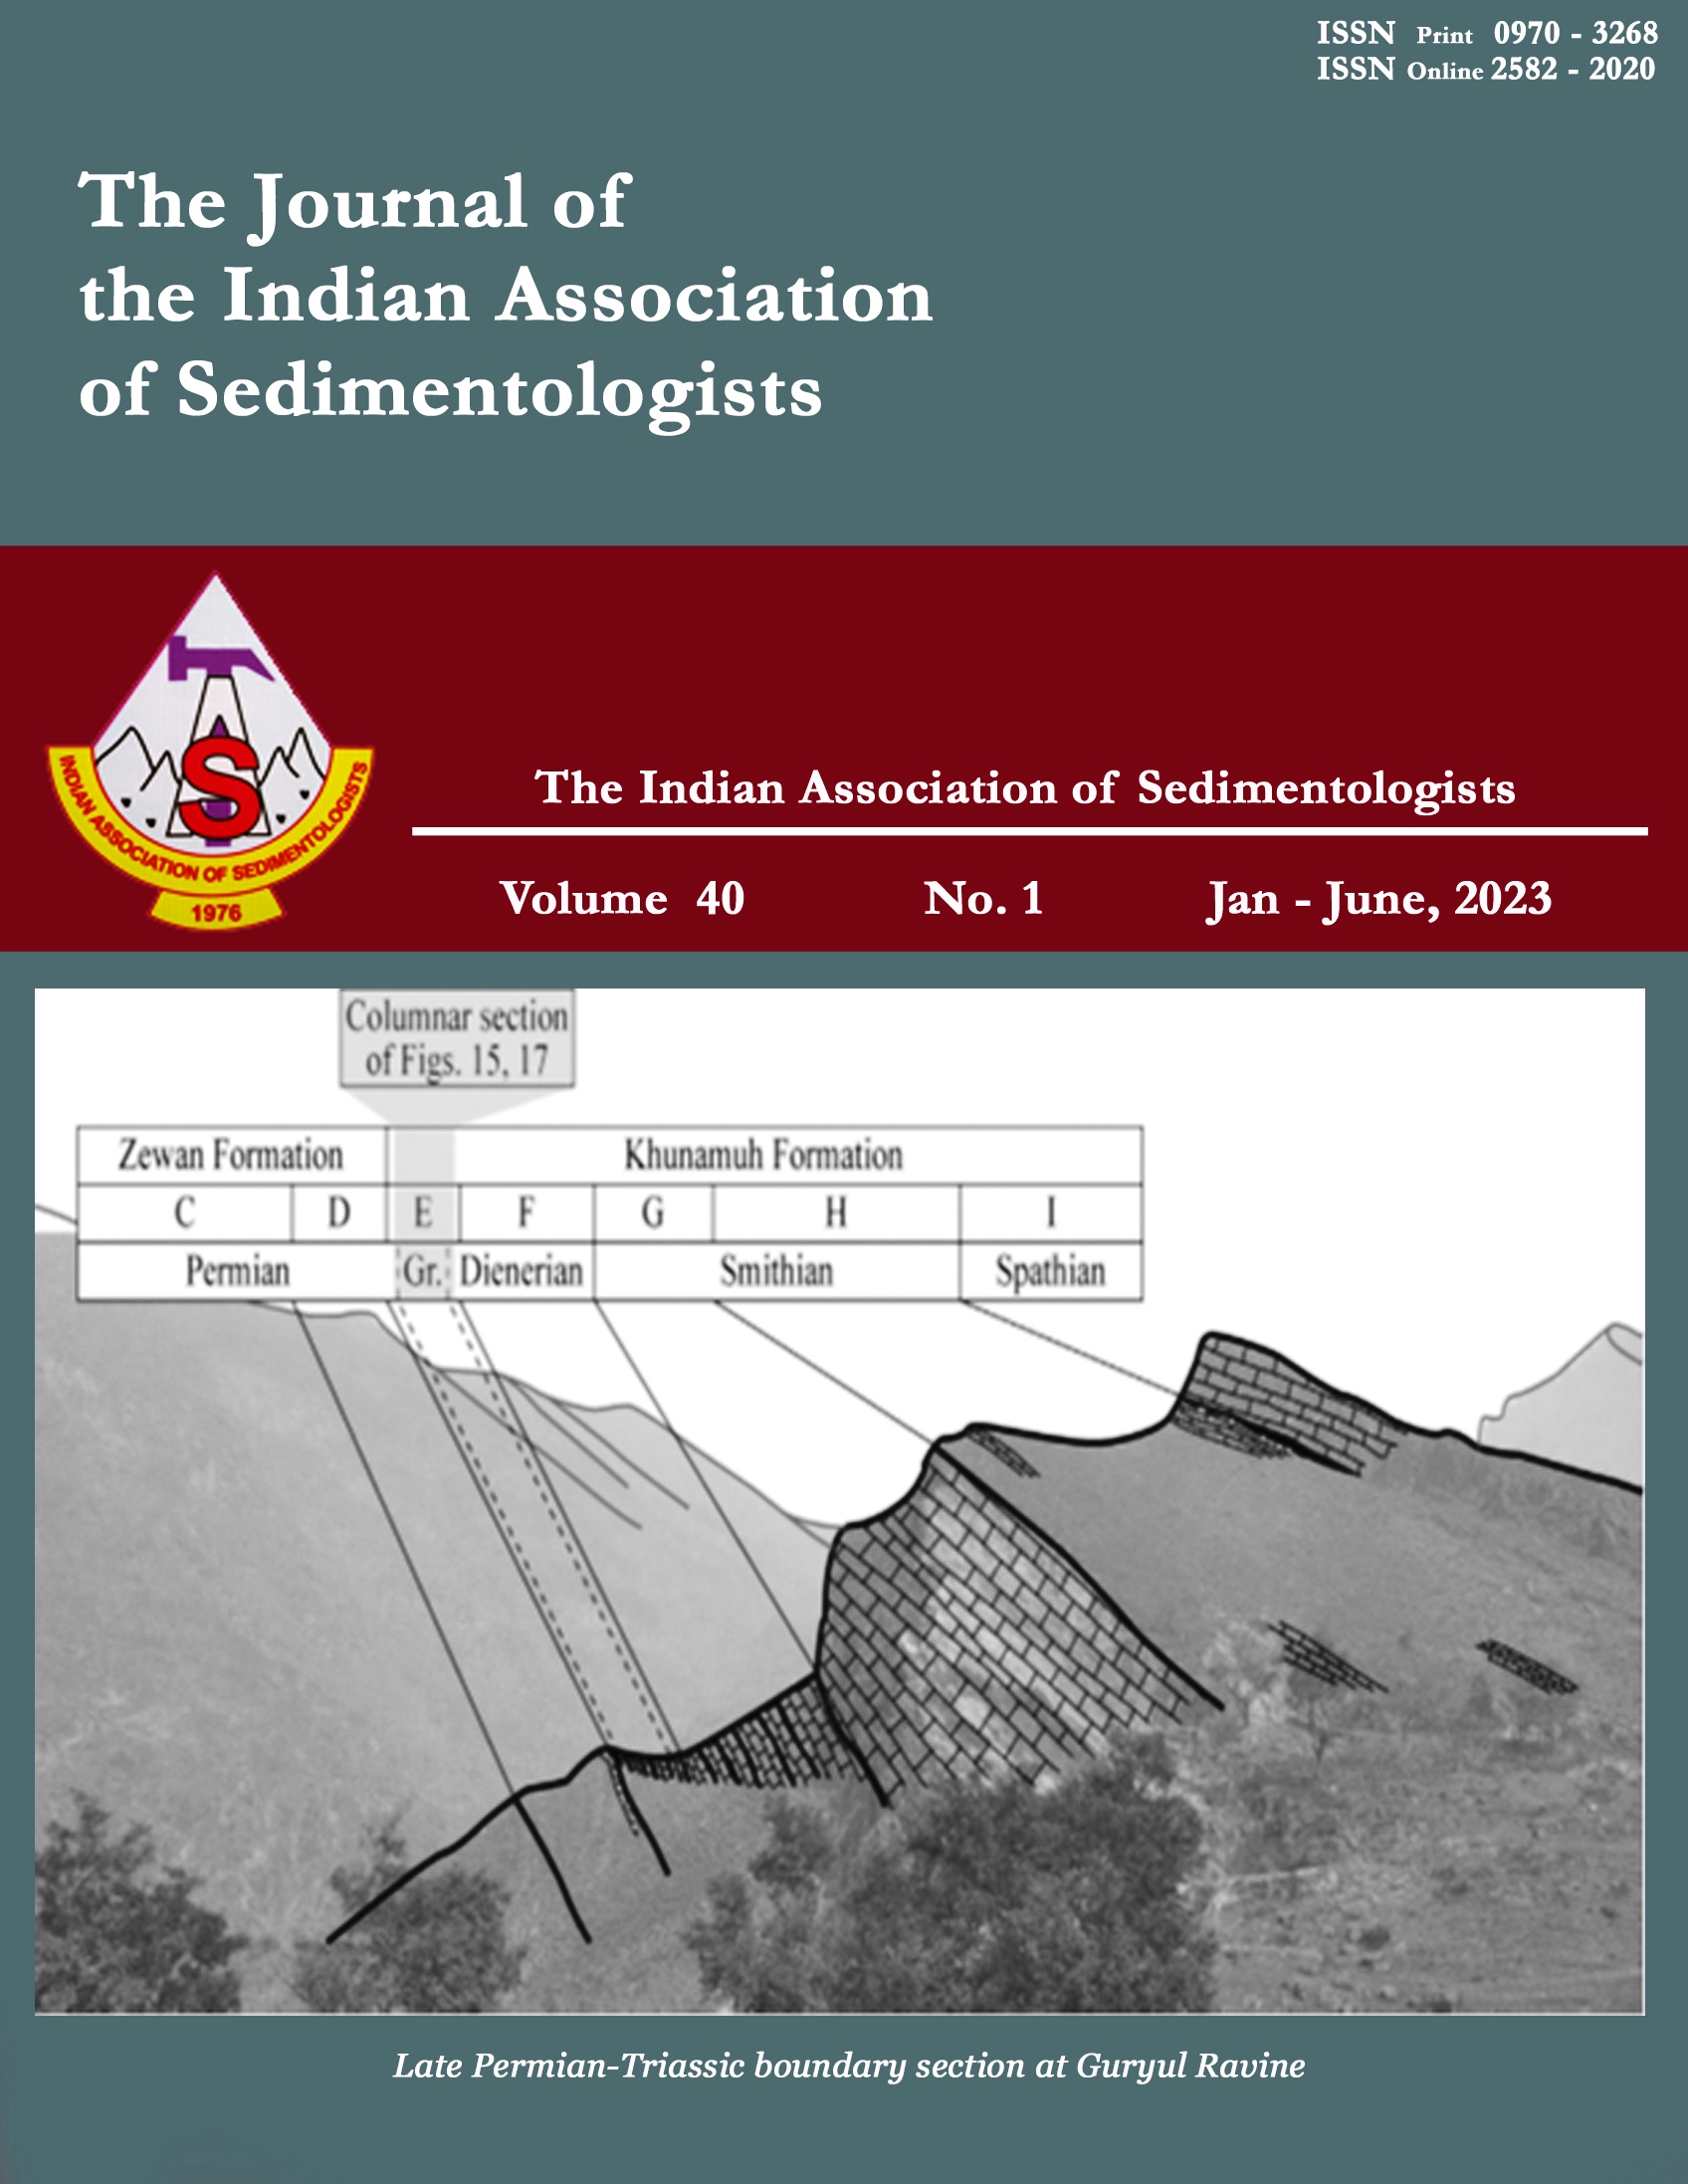 					View Vol. 40 No. I (2023): THE JOURNAL OF THE INDIAN ASSOCIATION OF SEDIMENTOLOGISTS
				